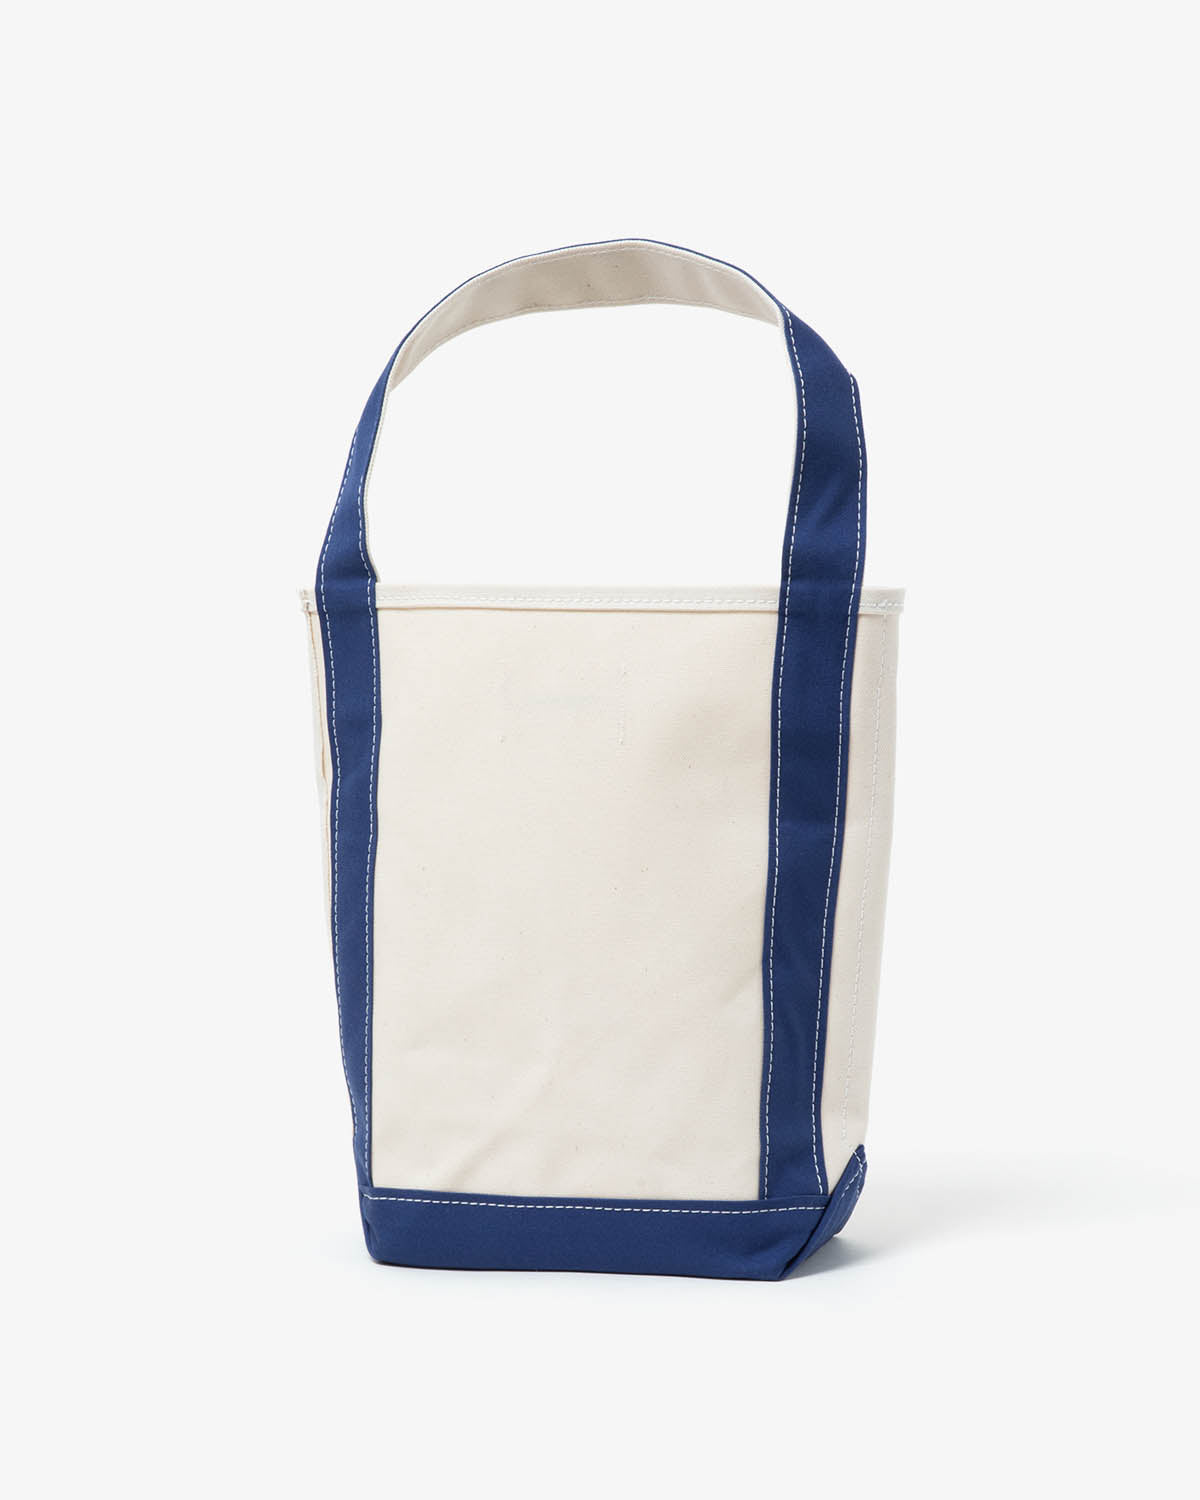 BAGUETTE TOTE SMALL